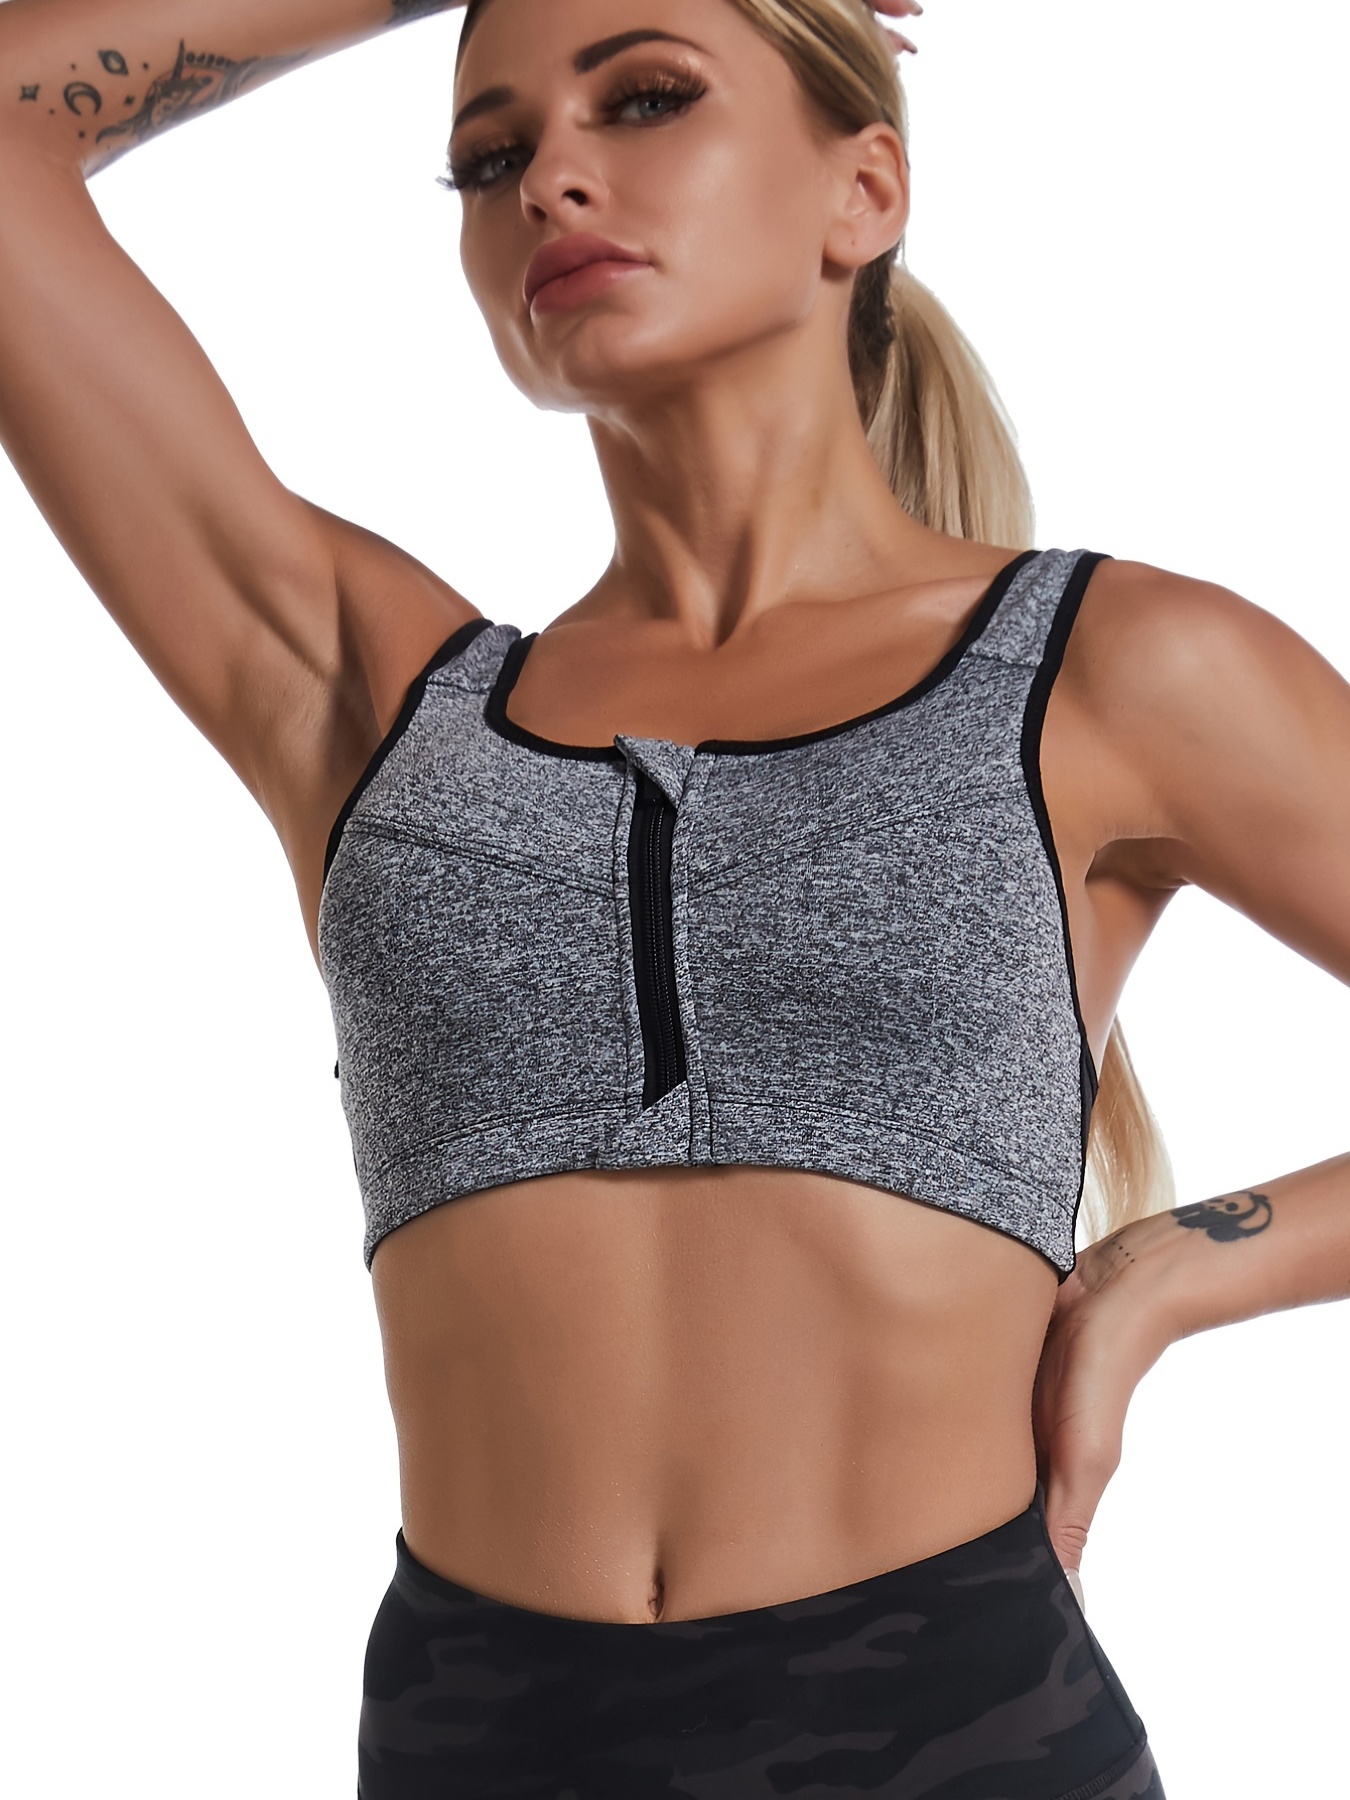 Ribbed Gym Top Women Seamless Fitness Sports Bra Quick Dry High